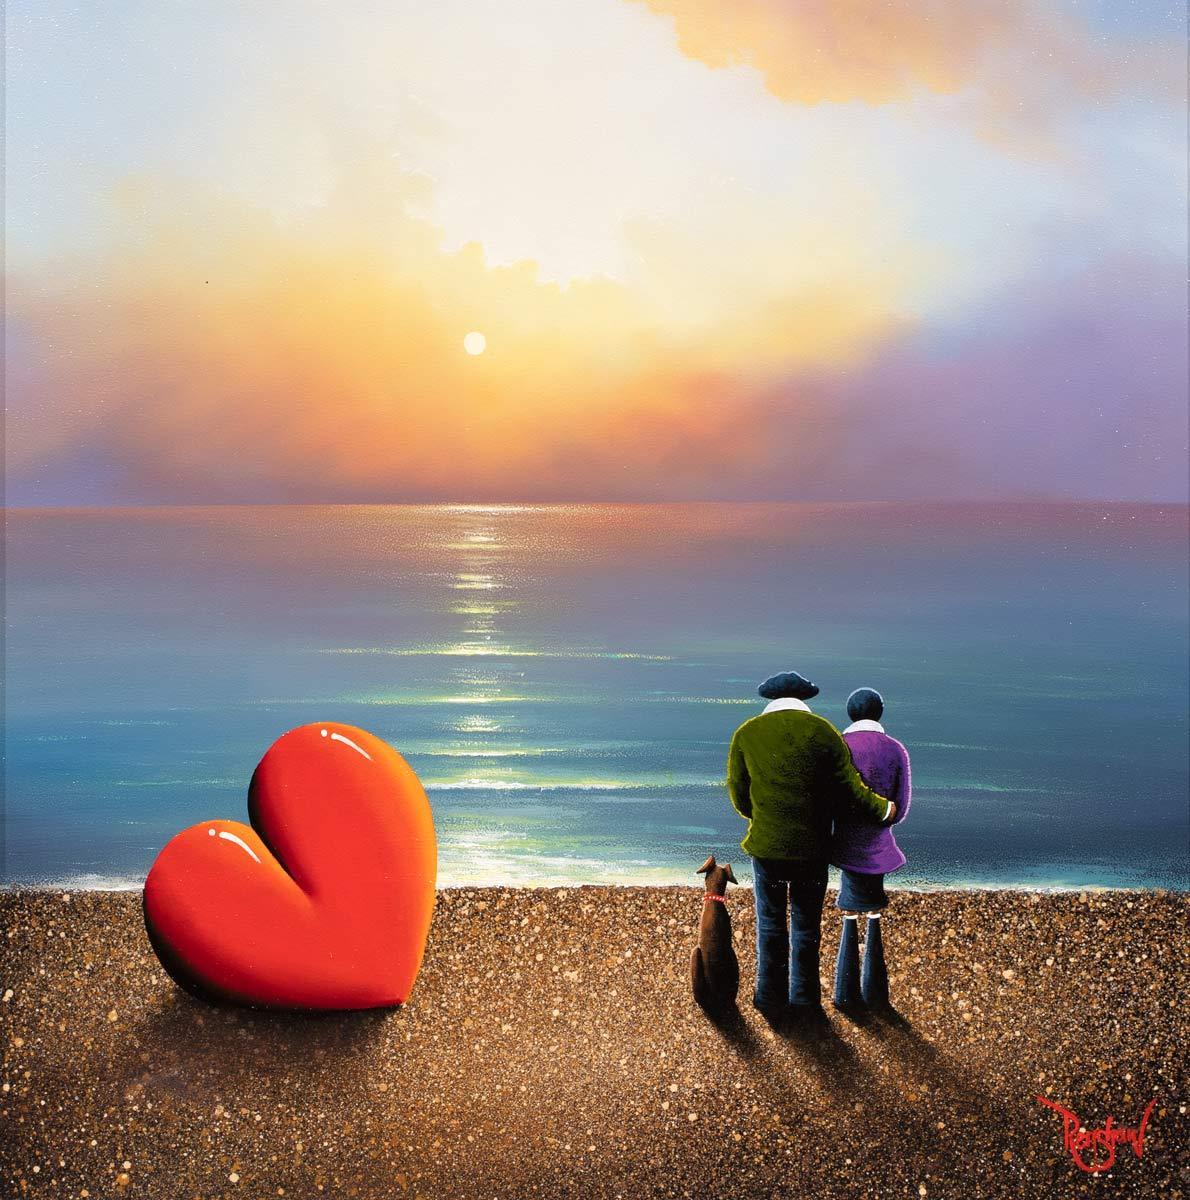 Copy of Love is in the Air - Original David Renshaw Framed